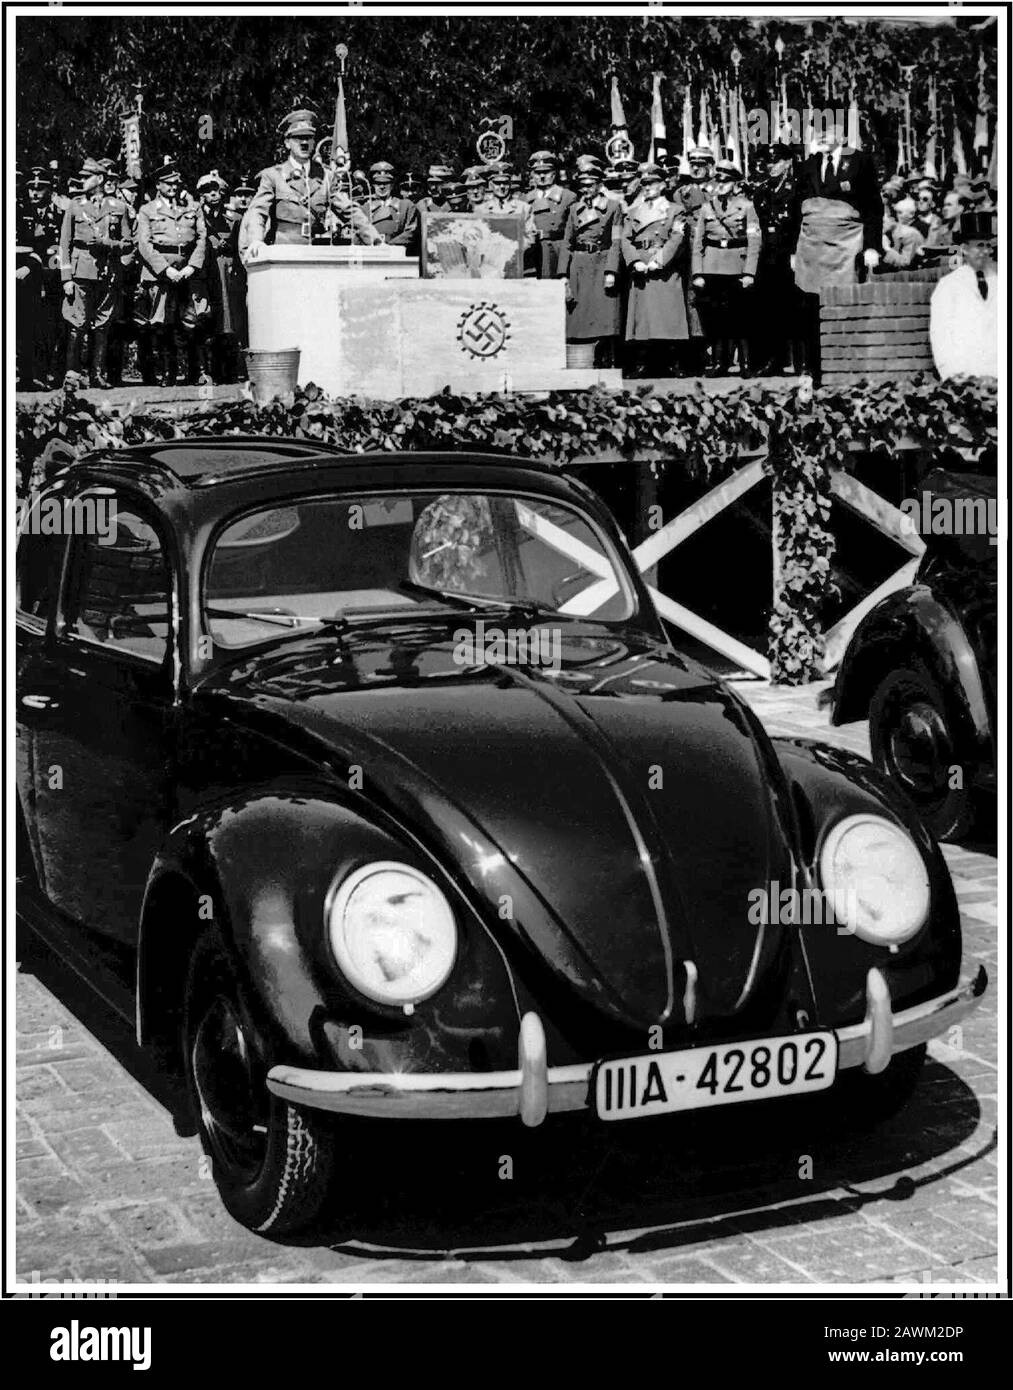 1930's ADOLF HITLER  SPEECH at KDF-Wagen VOLKSWAGEN launch. Hitler is making a speech behind the Nazi swastika engraved foundation stone at the launch of 'the people's car' KDF-Wagen VW Volkswagen Beetle air-cooled motorcar, an acclaimed and inspired design by the automotive genius Dr Porsche, launched at Fallersleben Wolfsburg Germany May 1938 Stock Photo